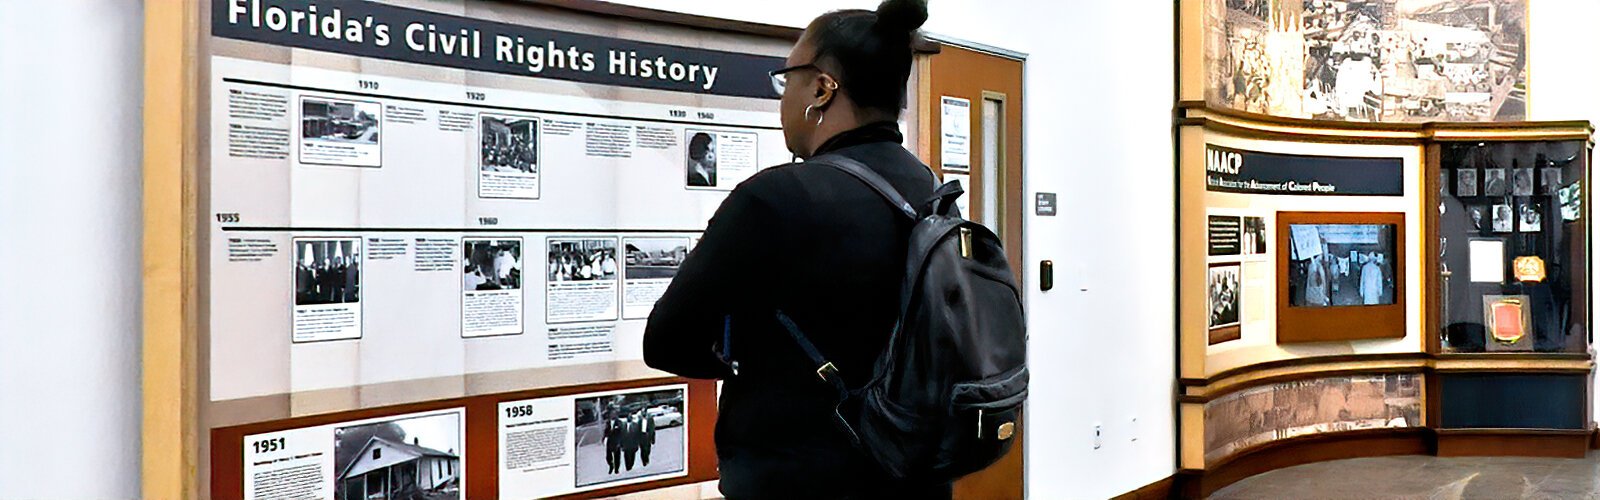 In the lobby of the Robert W. Saunders, Sr. Public Library, several museum-quality exhibits, including displays on the civil rights movement and the NAACP, can absorb visitors for hours.